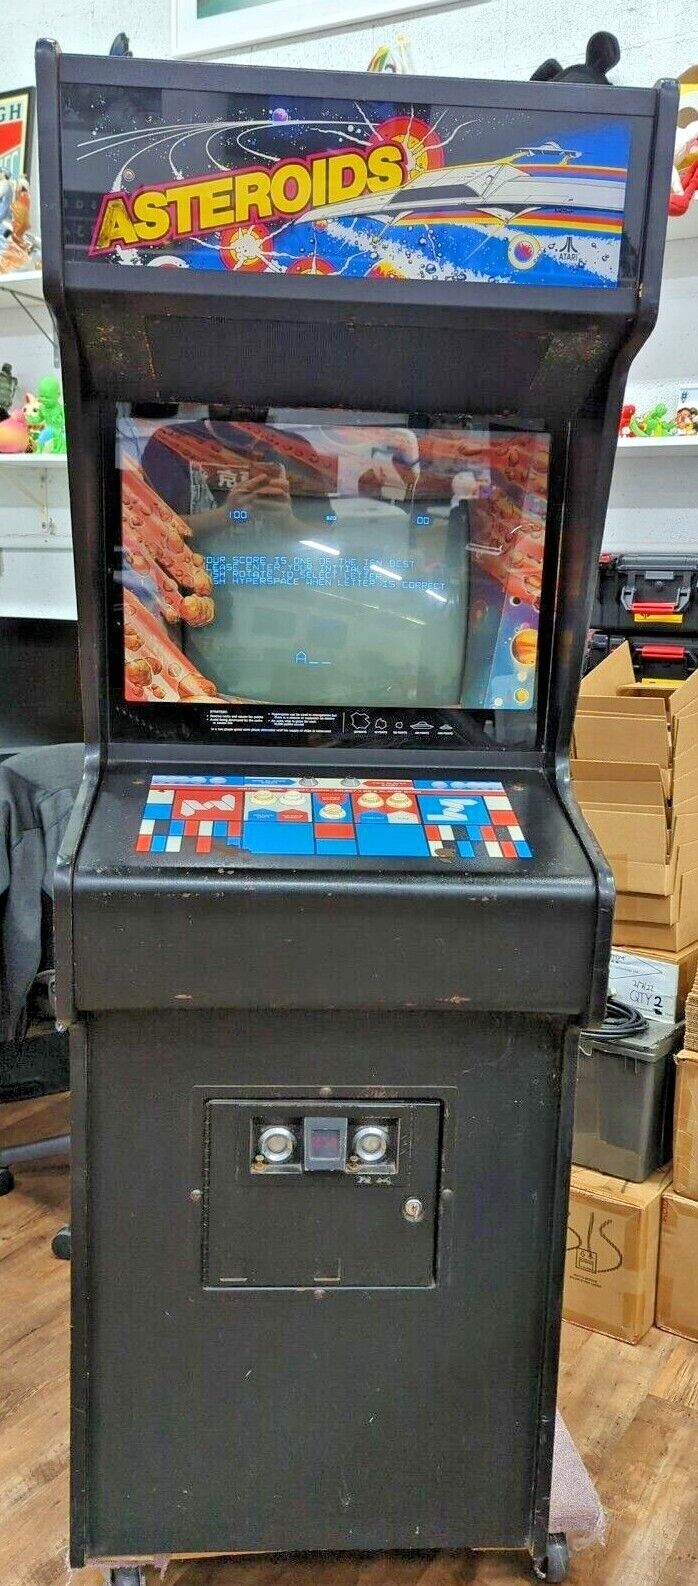 *RARE* WORKING 1979 ATARI ASTEROIDS ARCADE GAME - LOCAL PICK UP ONLY